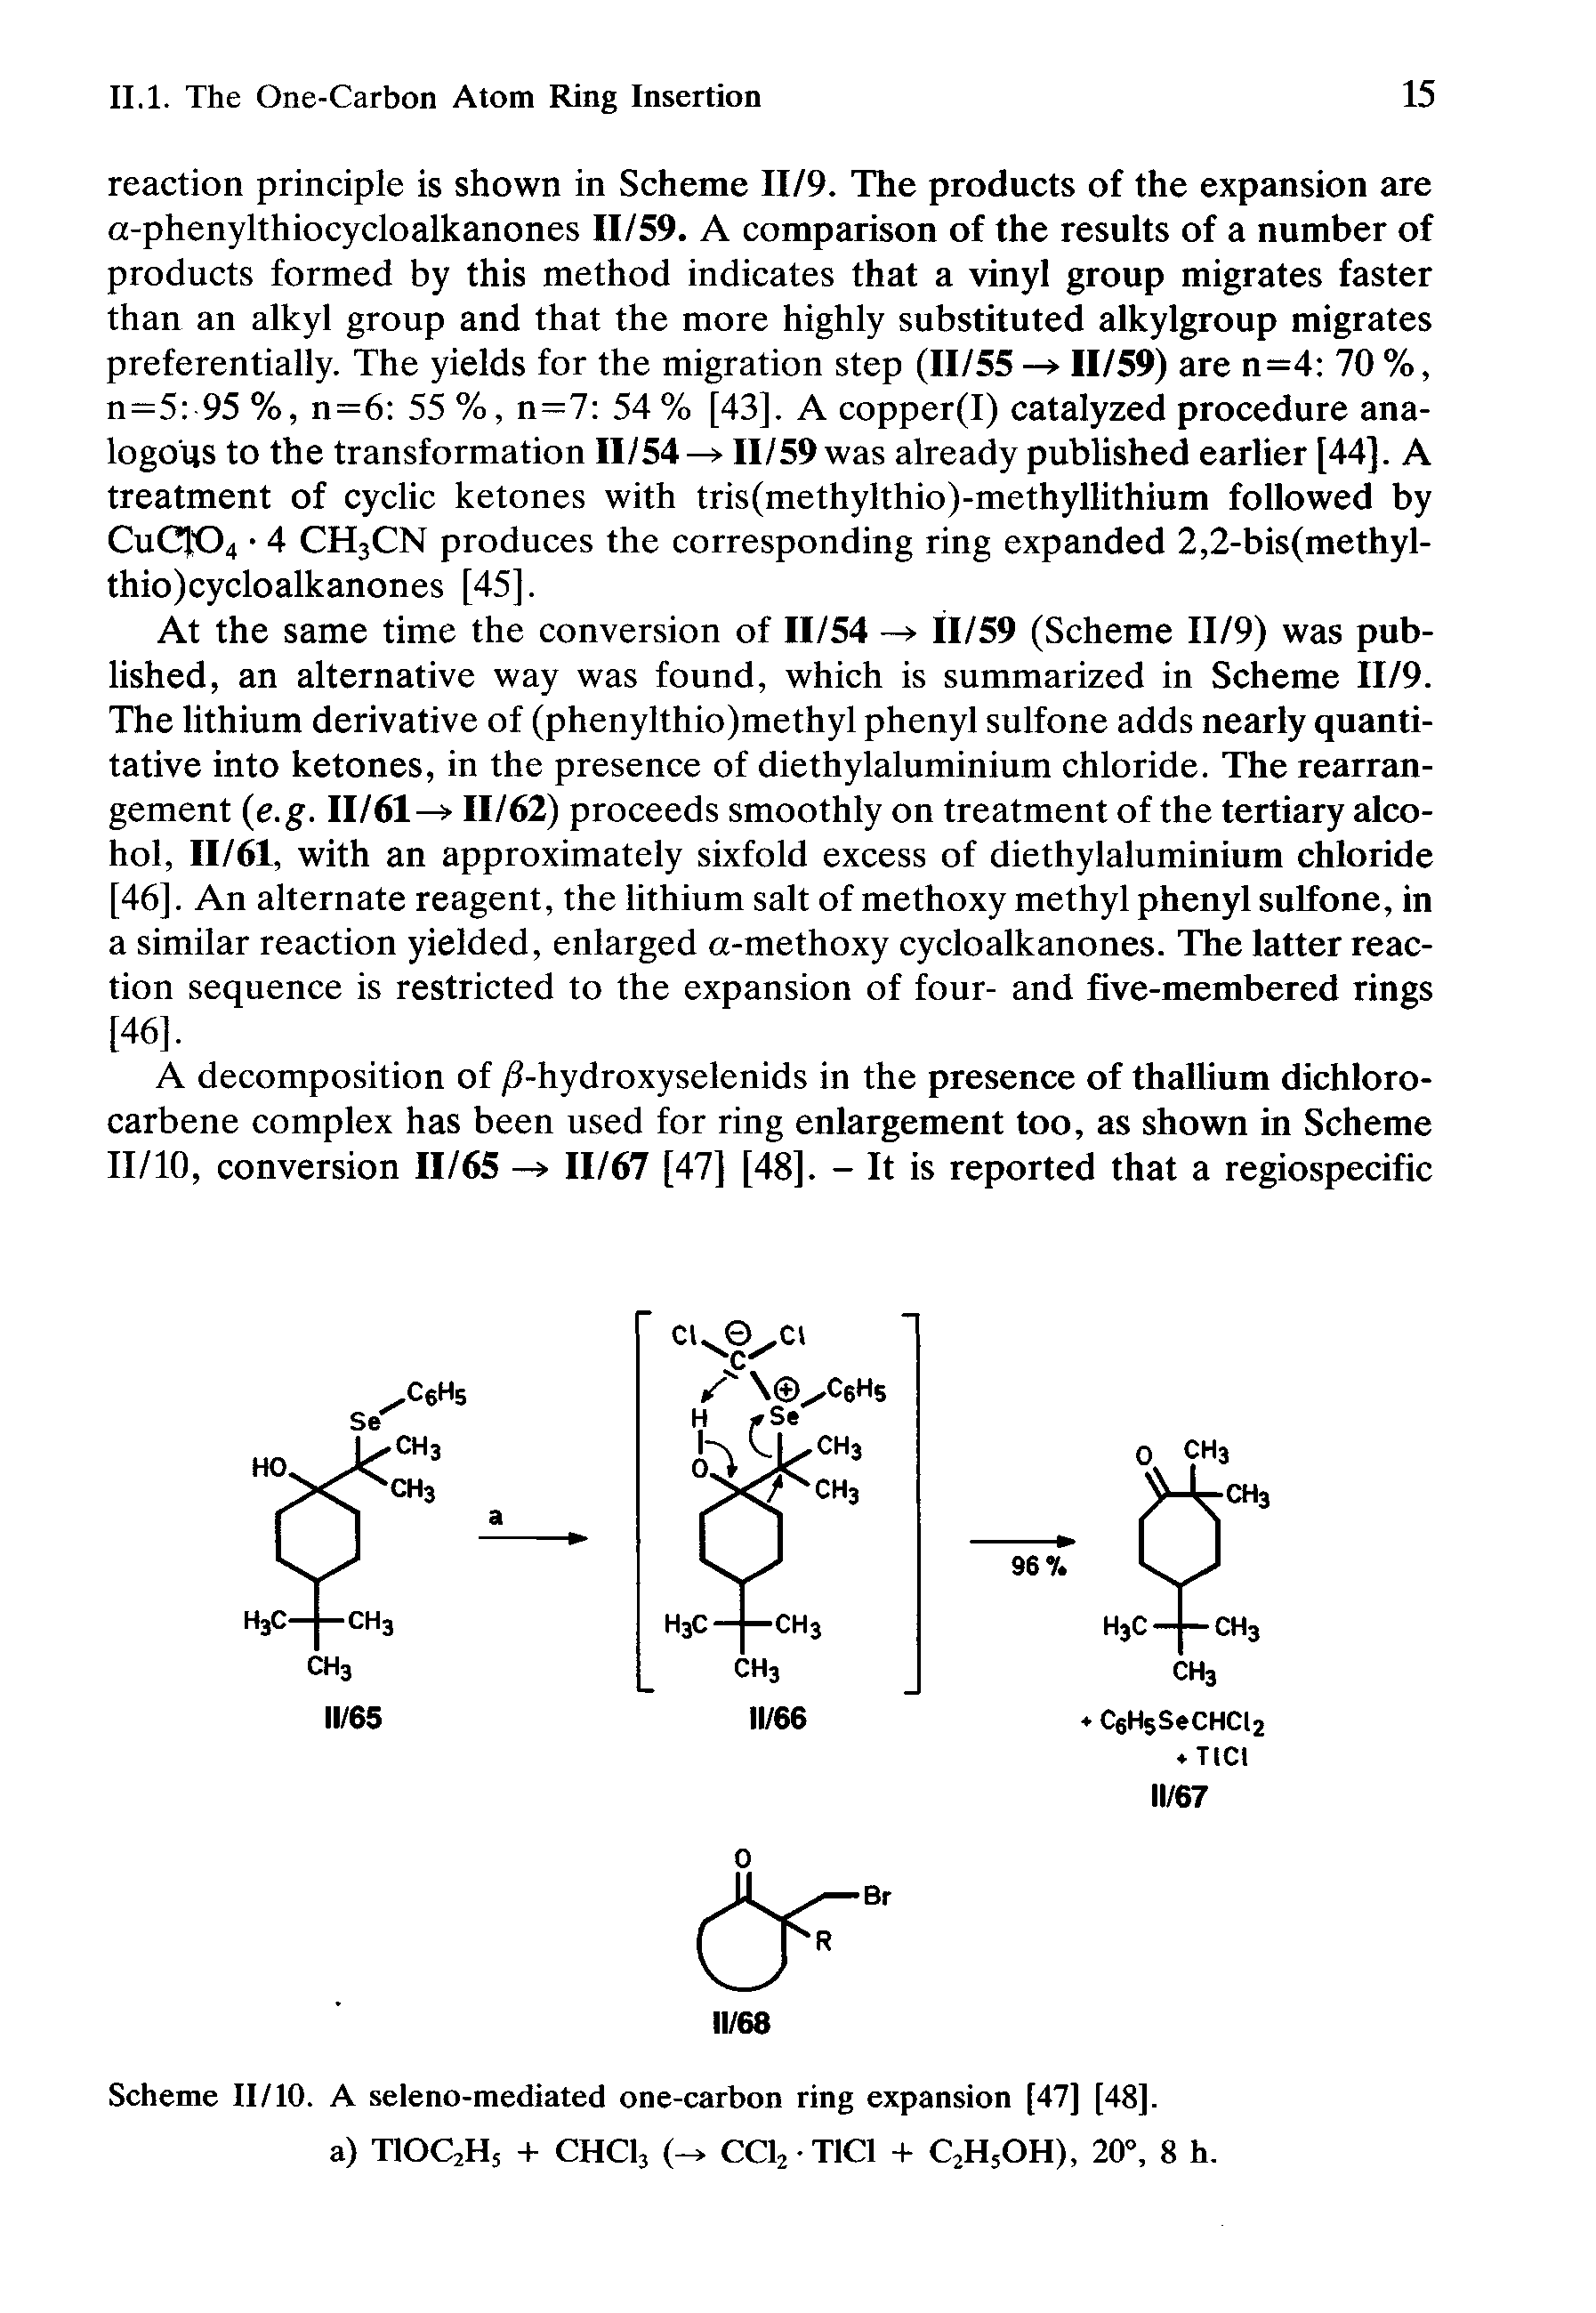 Scheme II/10. A seleno-mediated one-carbon ring expansion [47] [48].